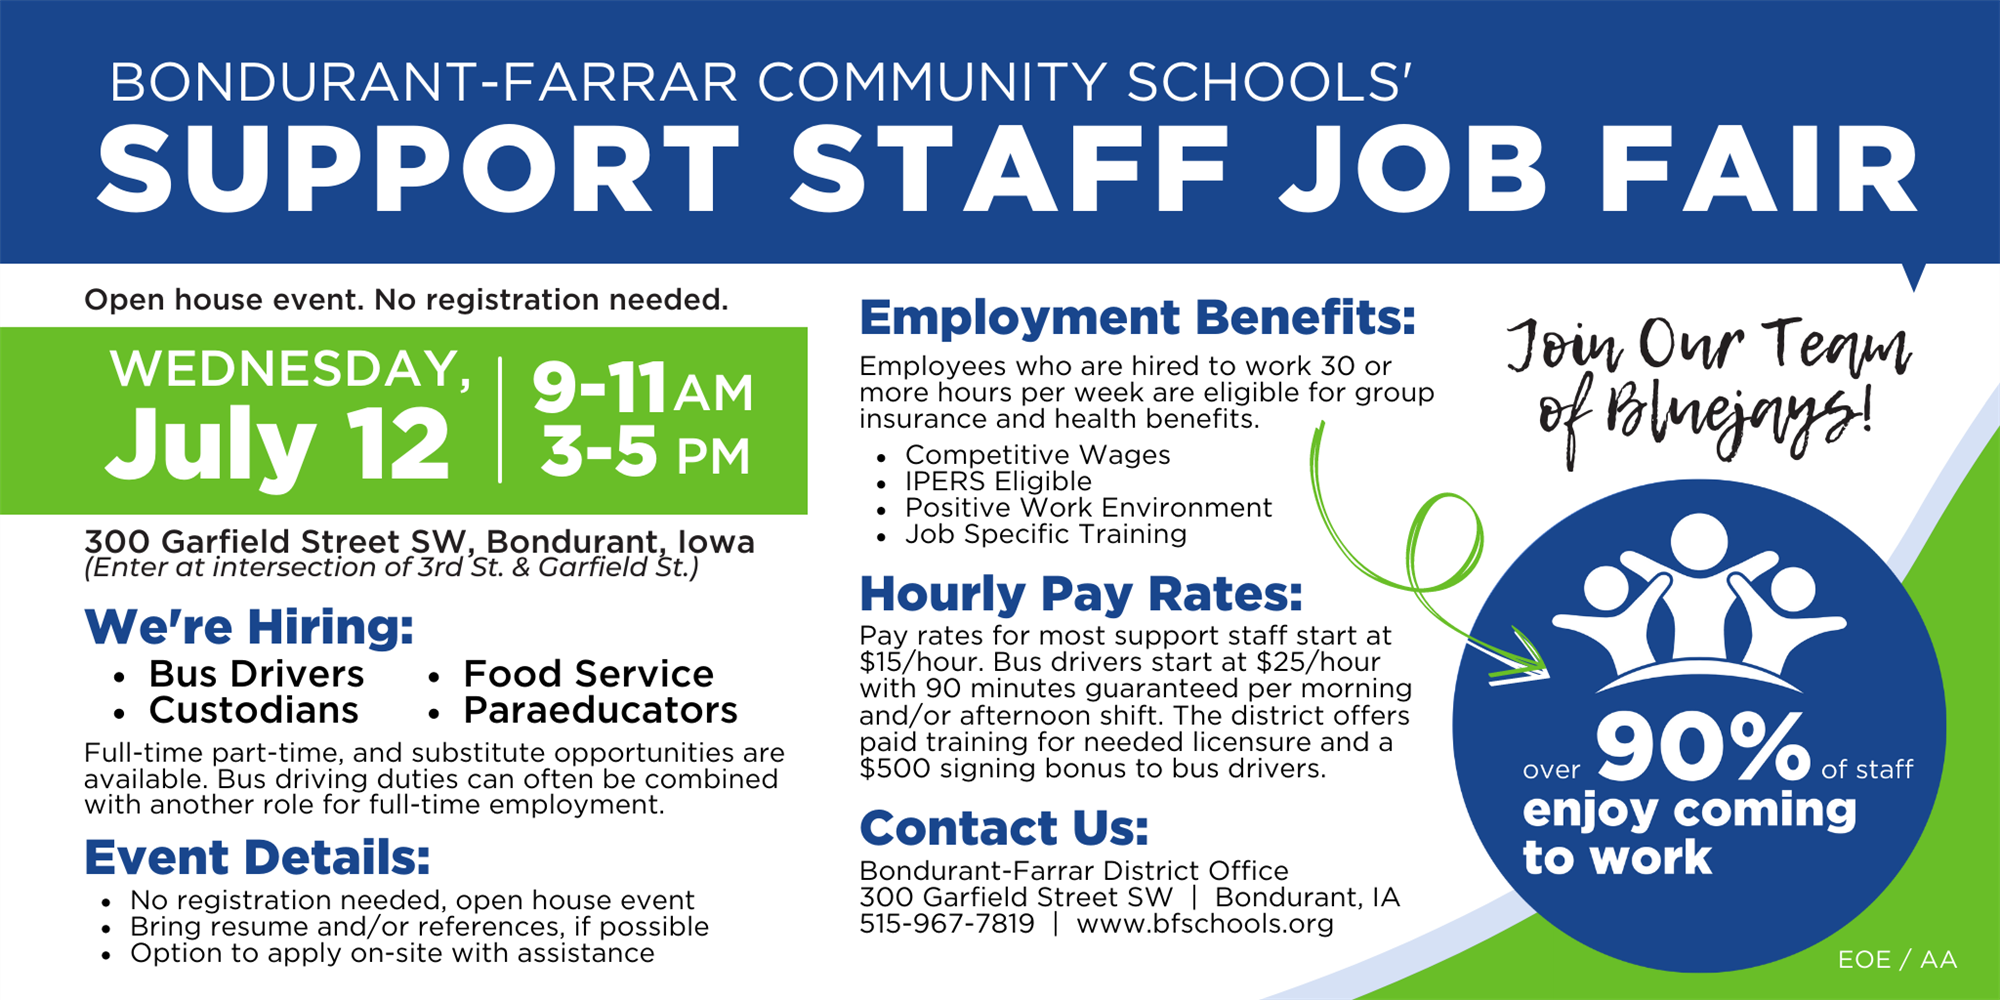 We're hiring. Join us for our support staff job fair on Wednesday, July 12 from 9-11am and 3-5pm at the BFCSD district office